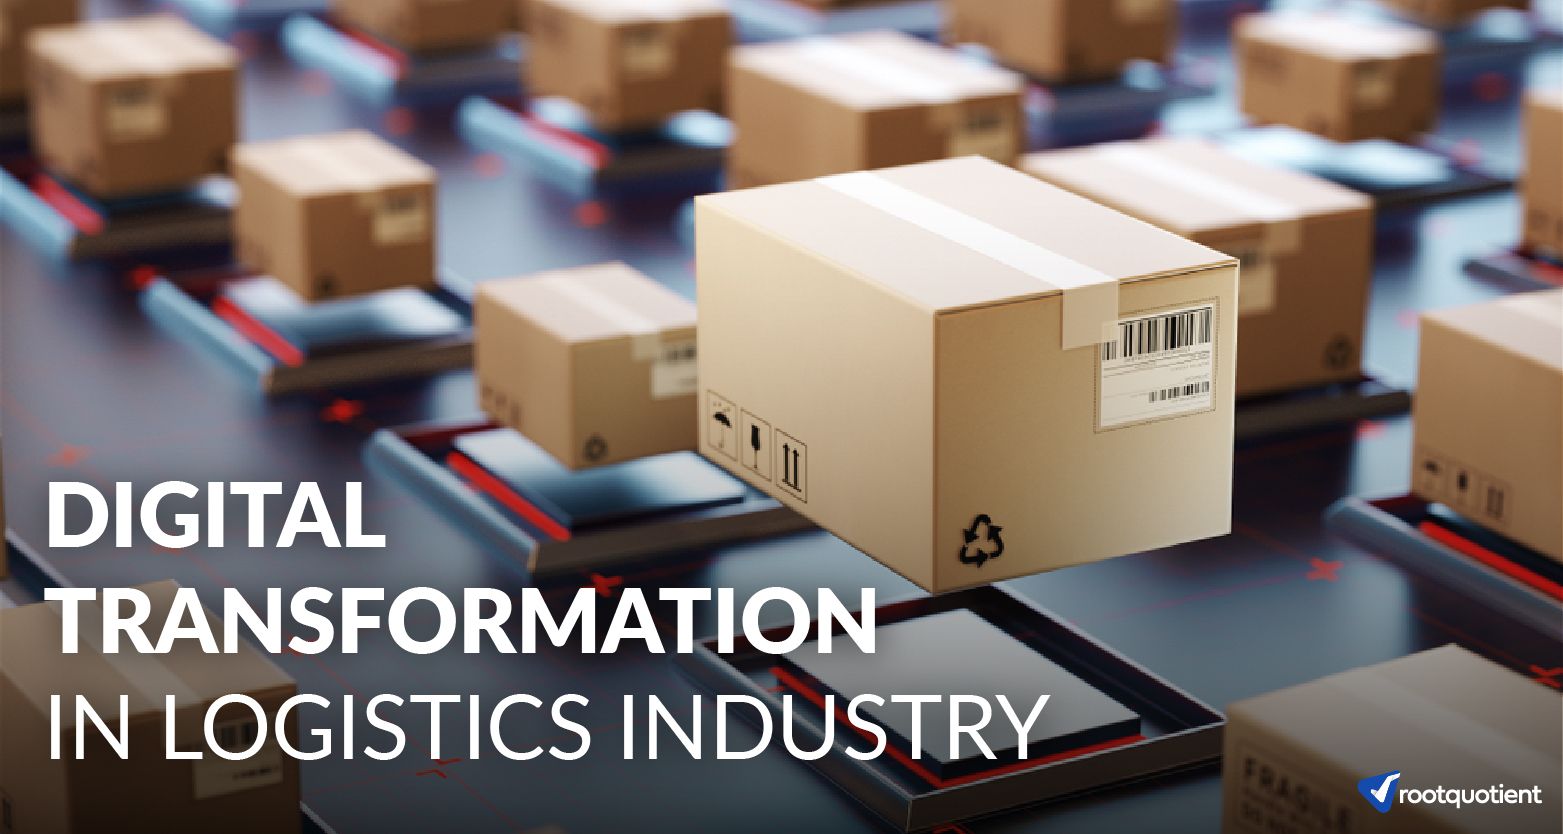 Digital Transformation and its Impacts on Logistics